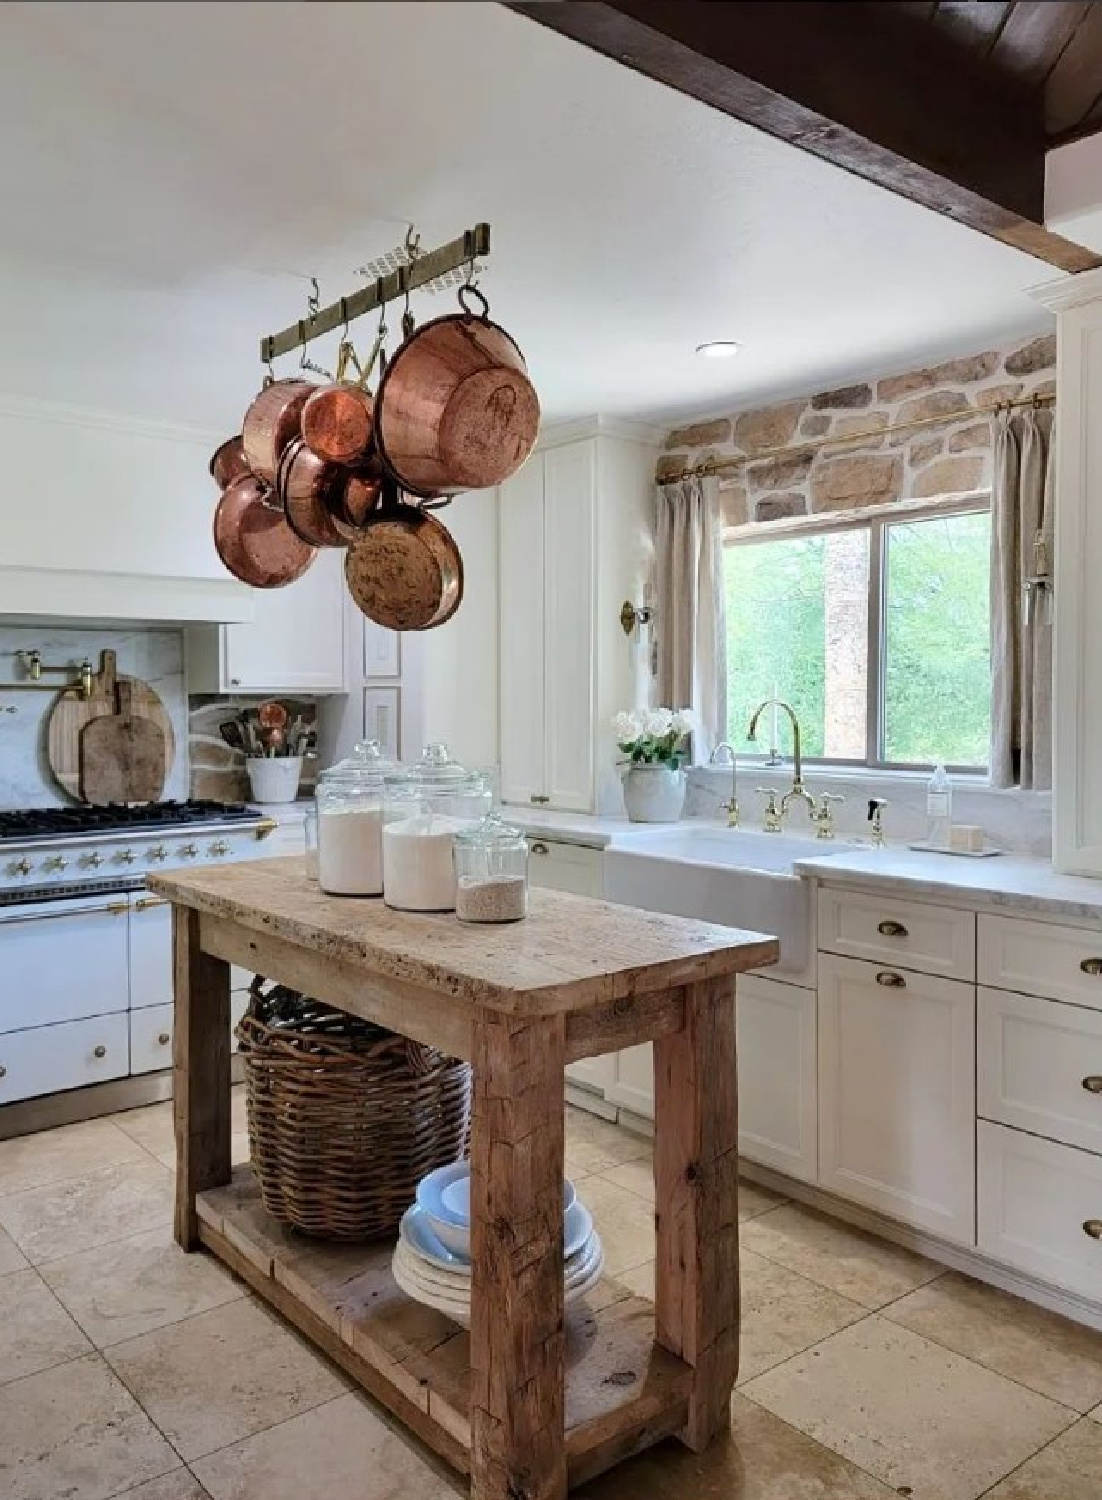 @thefrenchnestcointeriordesign French farmhouse kitchen with reclaimed wood island and copper pots hanging above. #frenchfarmhouse #frenchkitchens